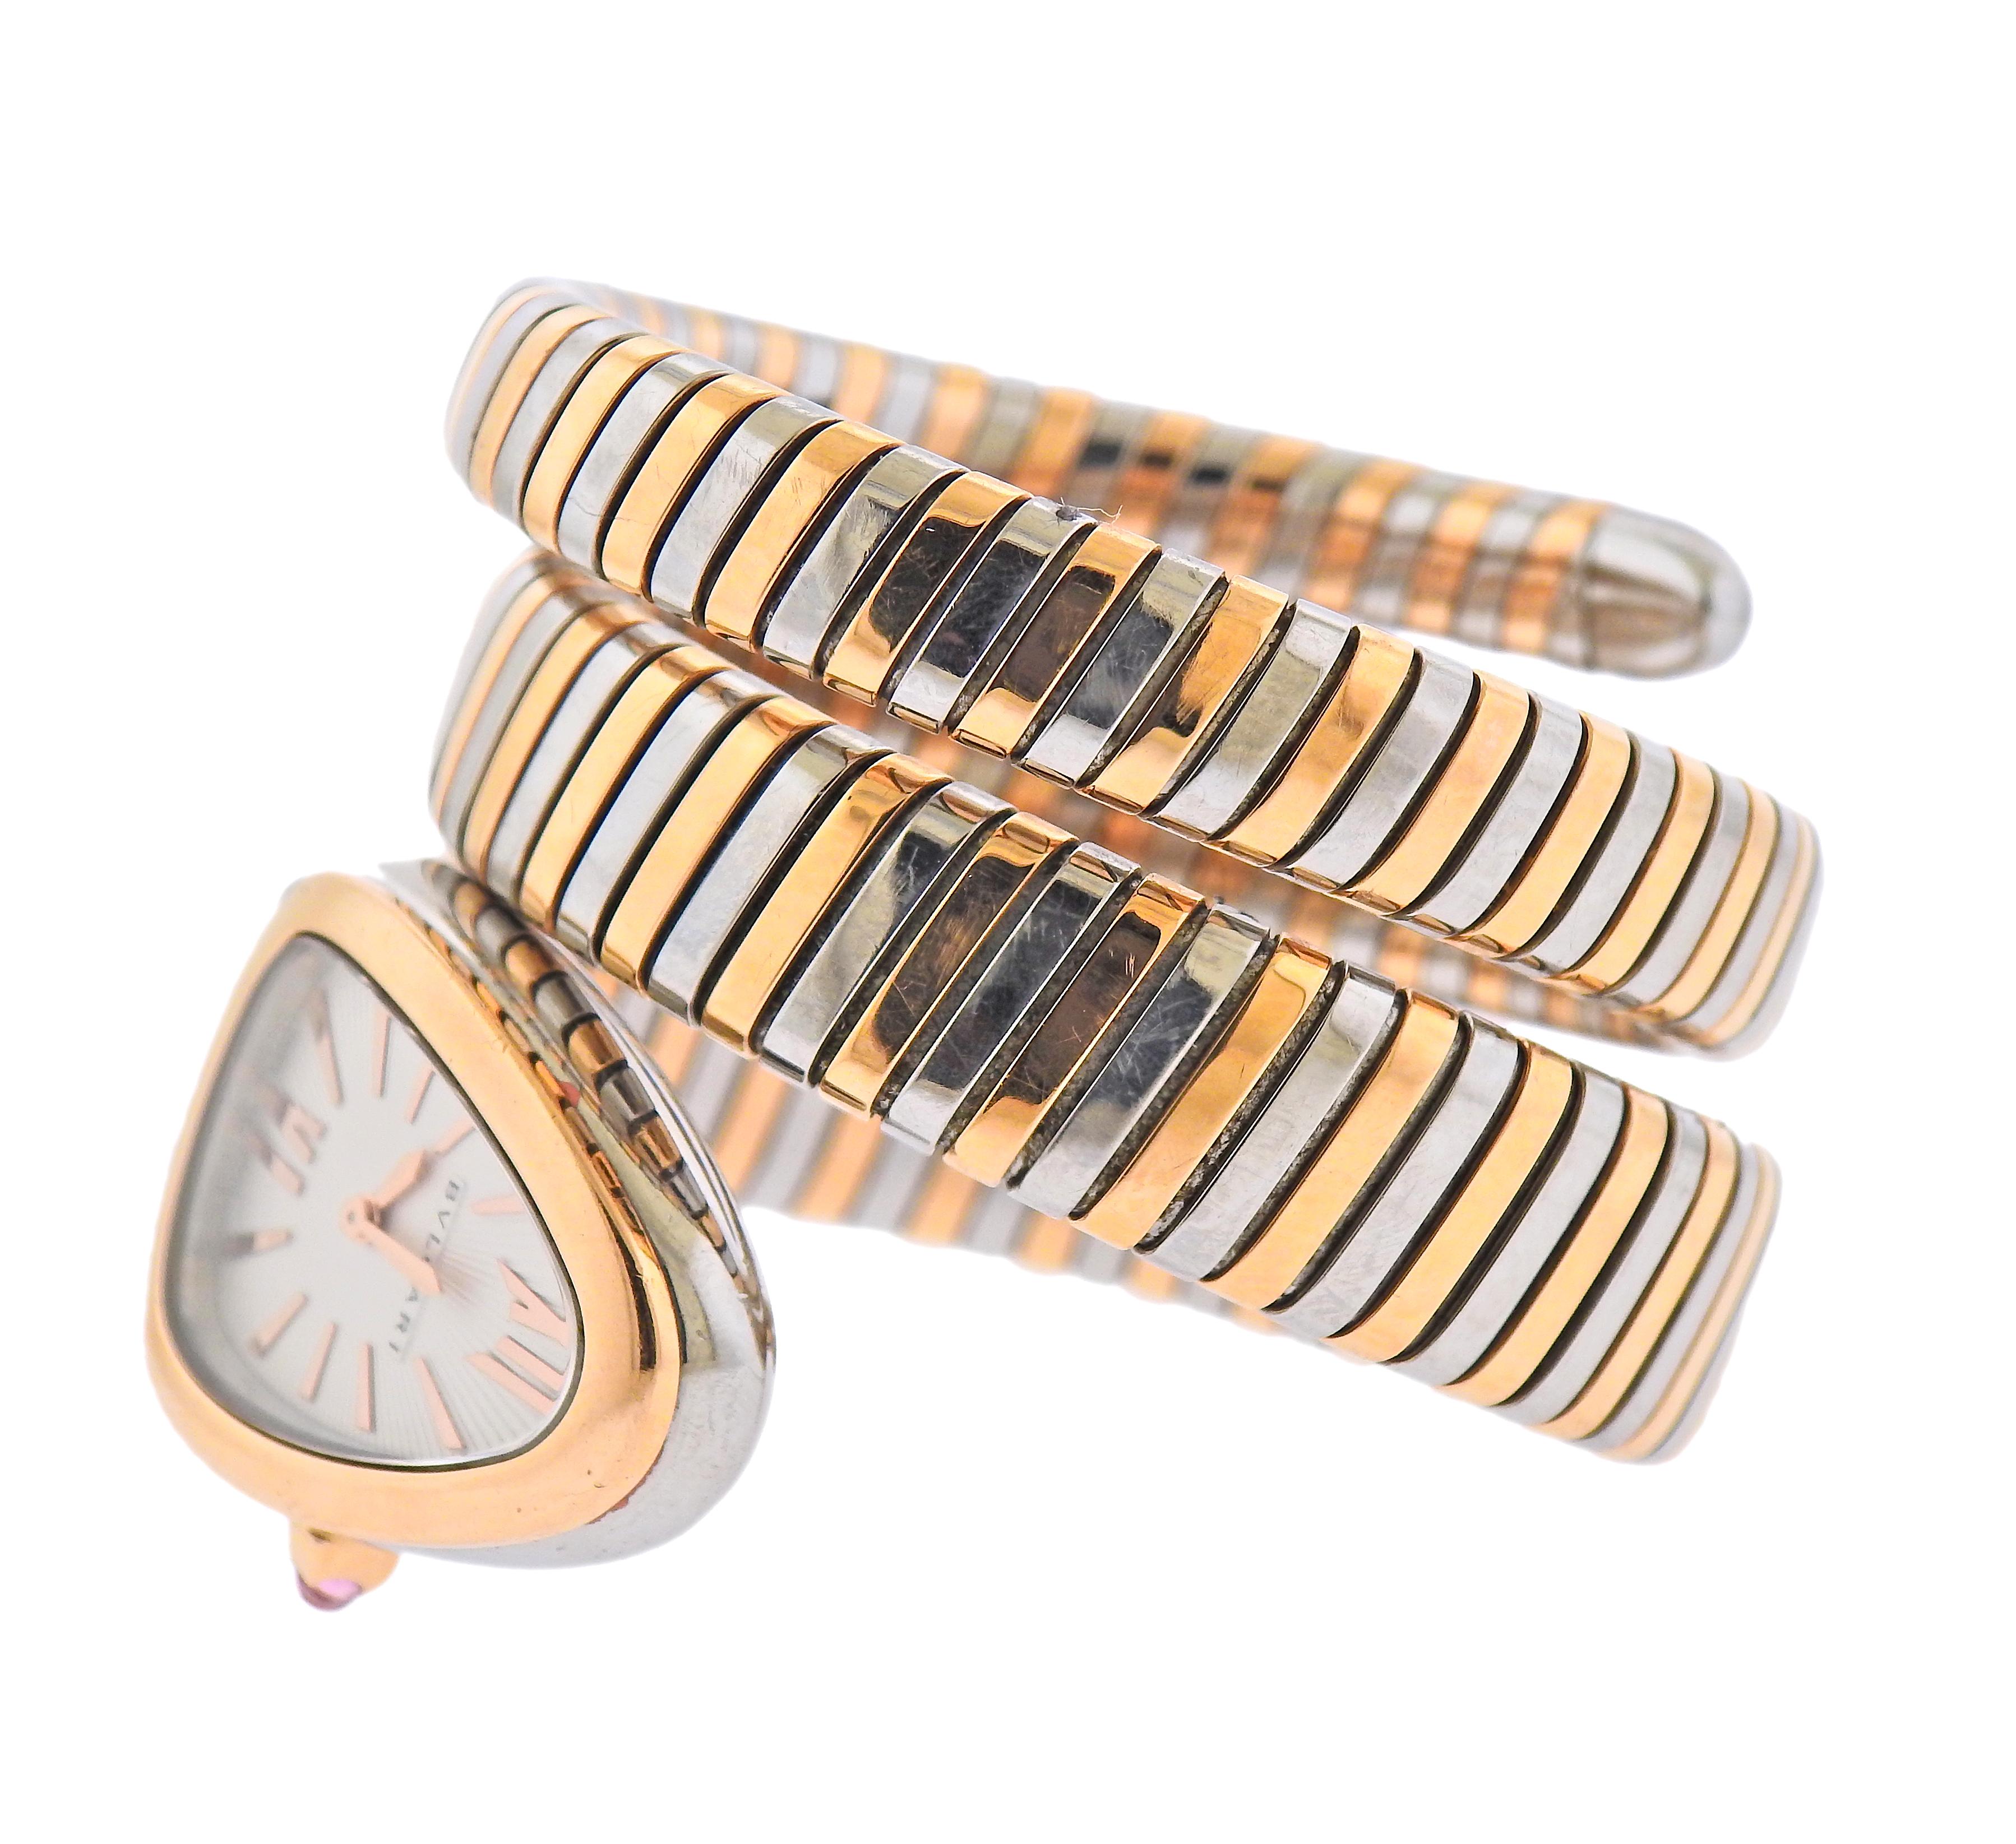 18k gold and steel Serpenti Tubas wrap bracelet watch by Bvlgari. Watch with quartz movement. Bracelet will fit up to a 7